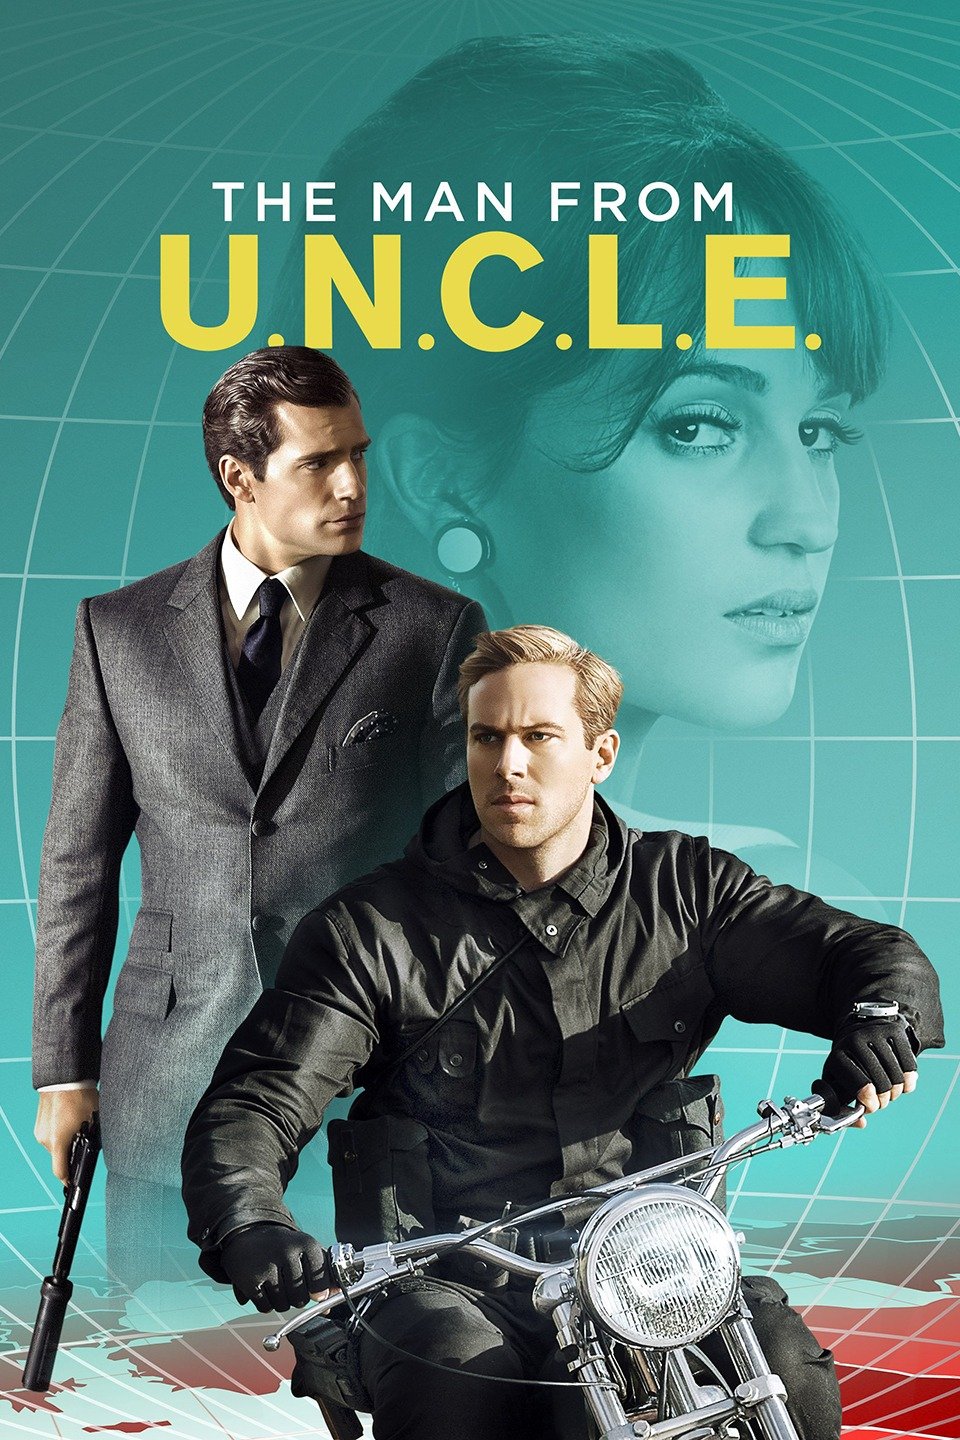 The Man From U.N.C.L.E. - Rotten Tomatoes